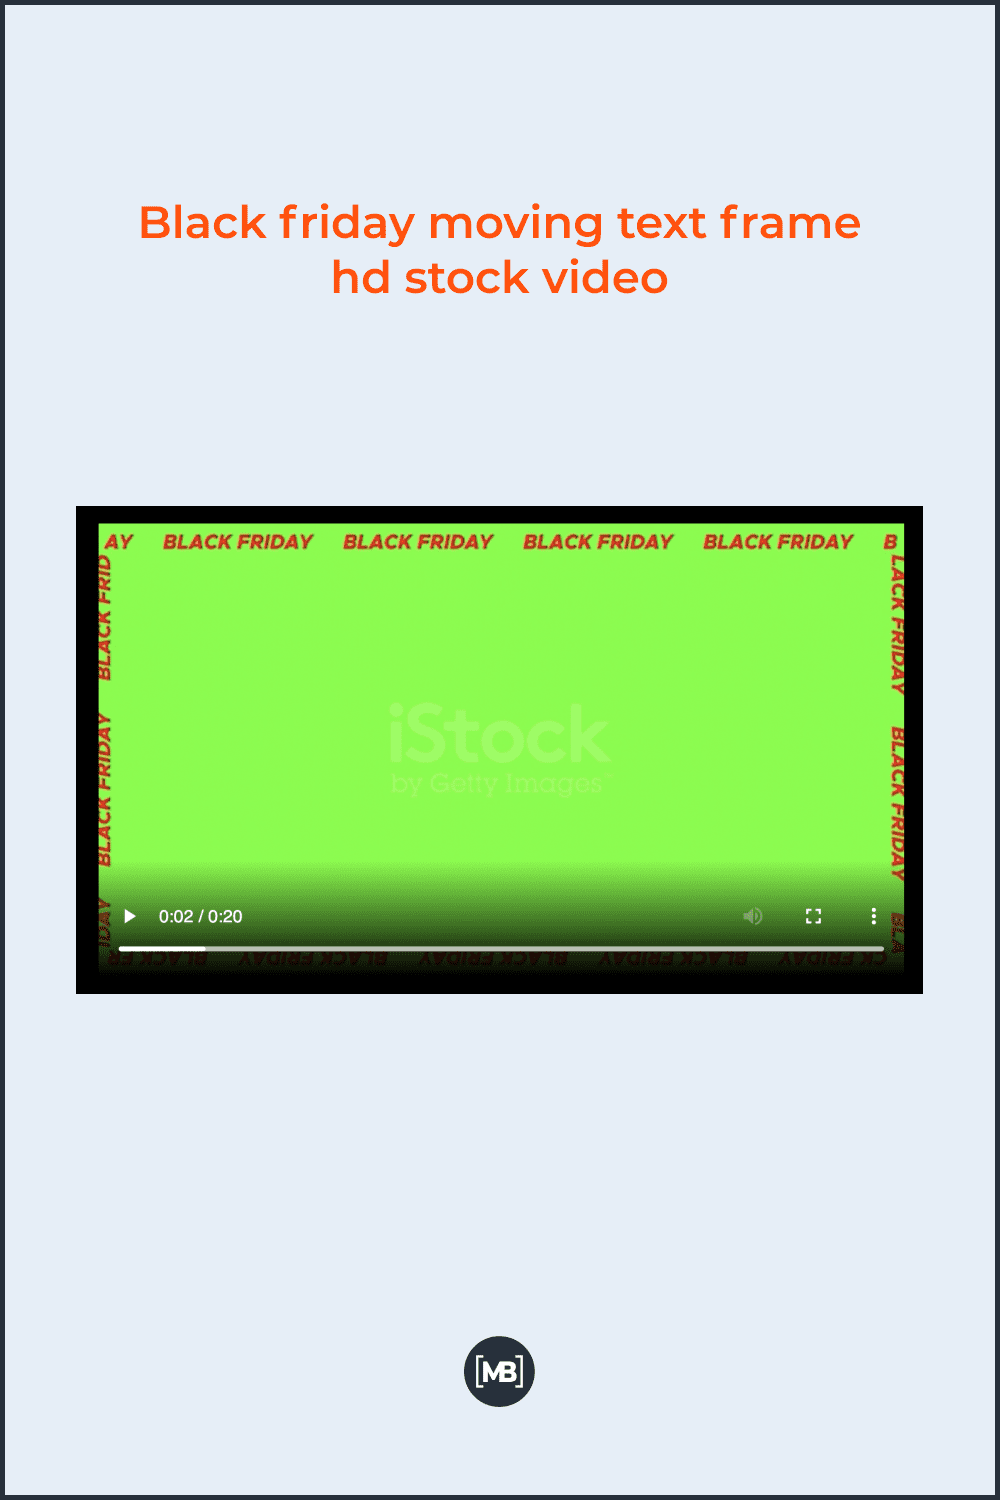 Black Friday moving text frame hd stock video.